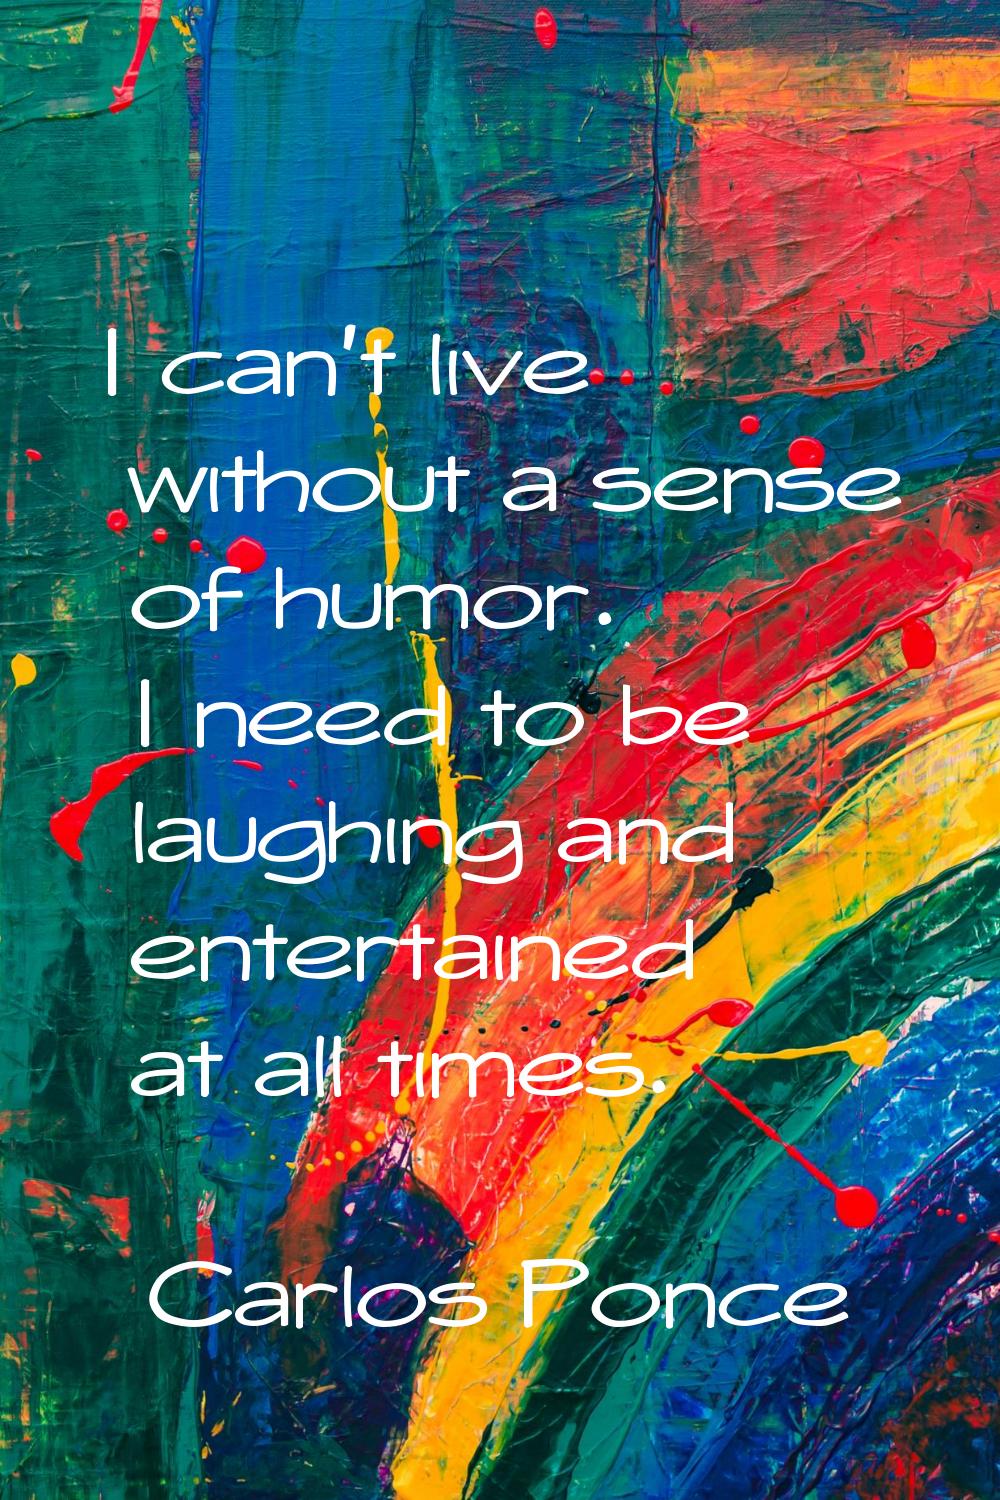 I can't live without a sense of humor. I need to be laughing and entertained at all times.